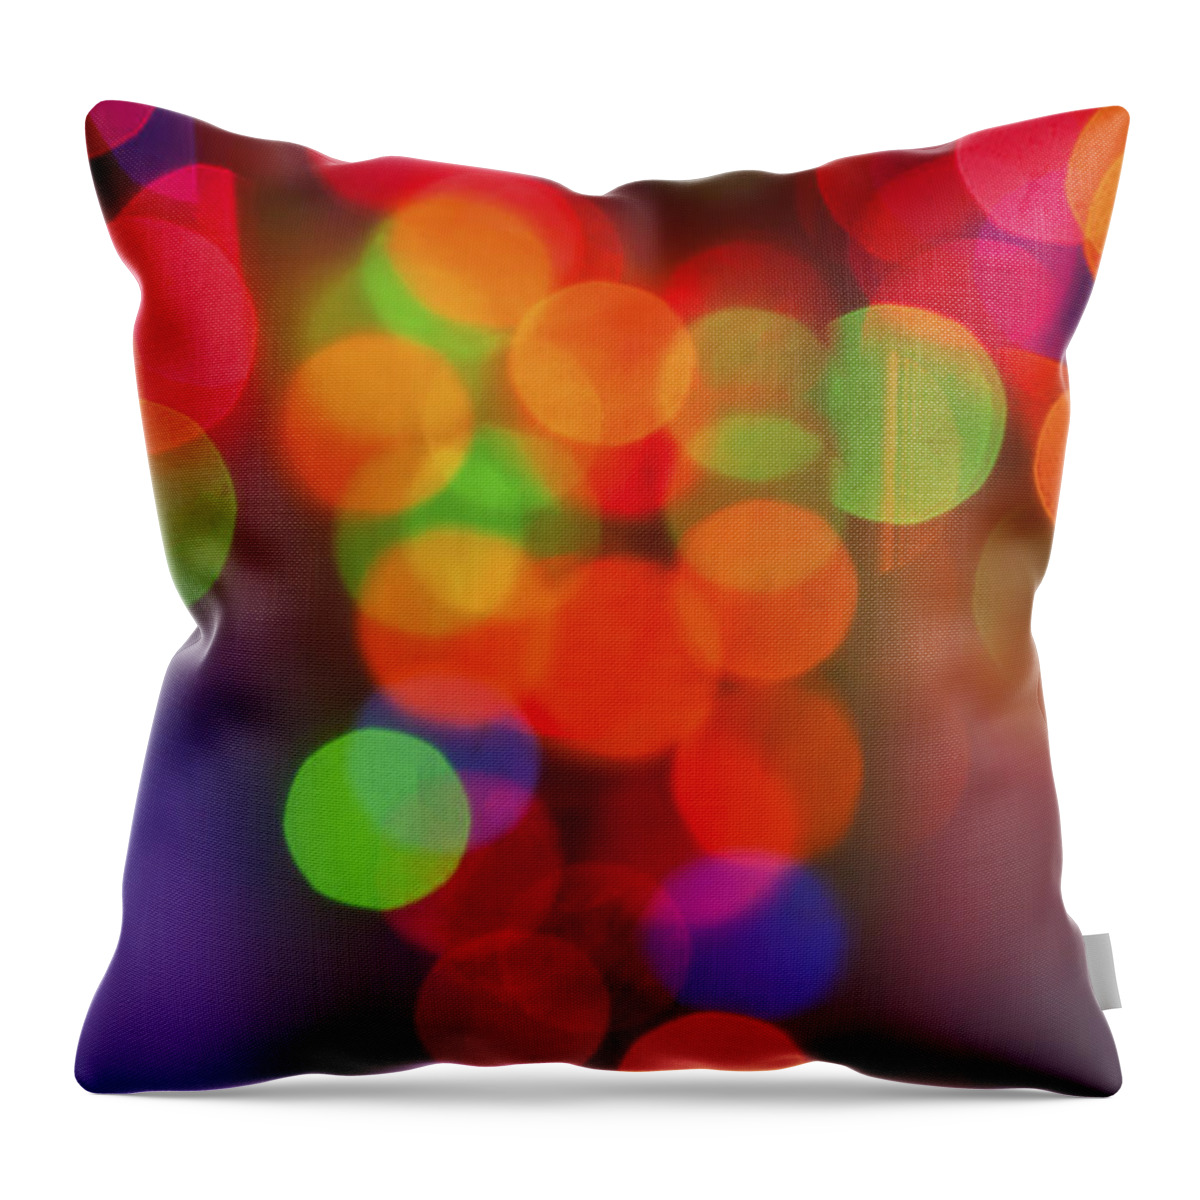 Bunch Throw Pillow featuring the photograph A Bunch Of Lights by Diane Macdonald